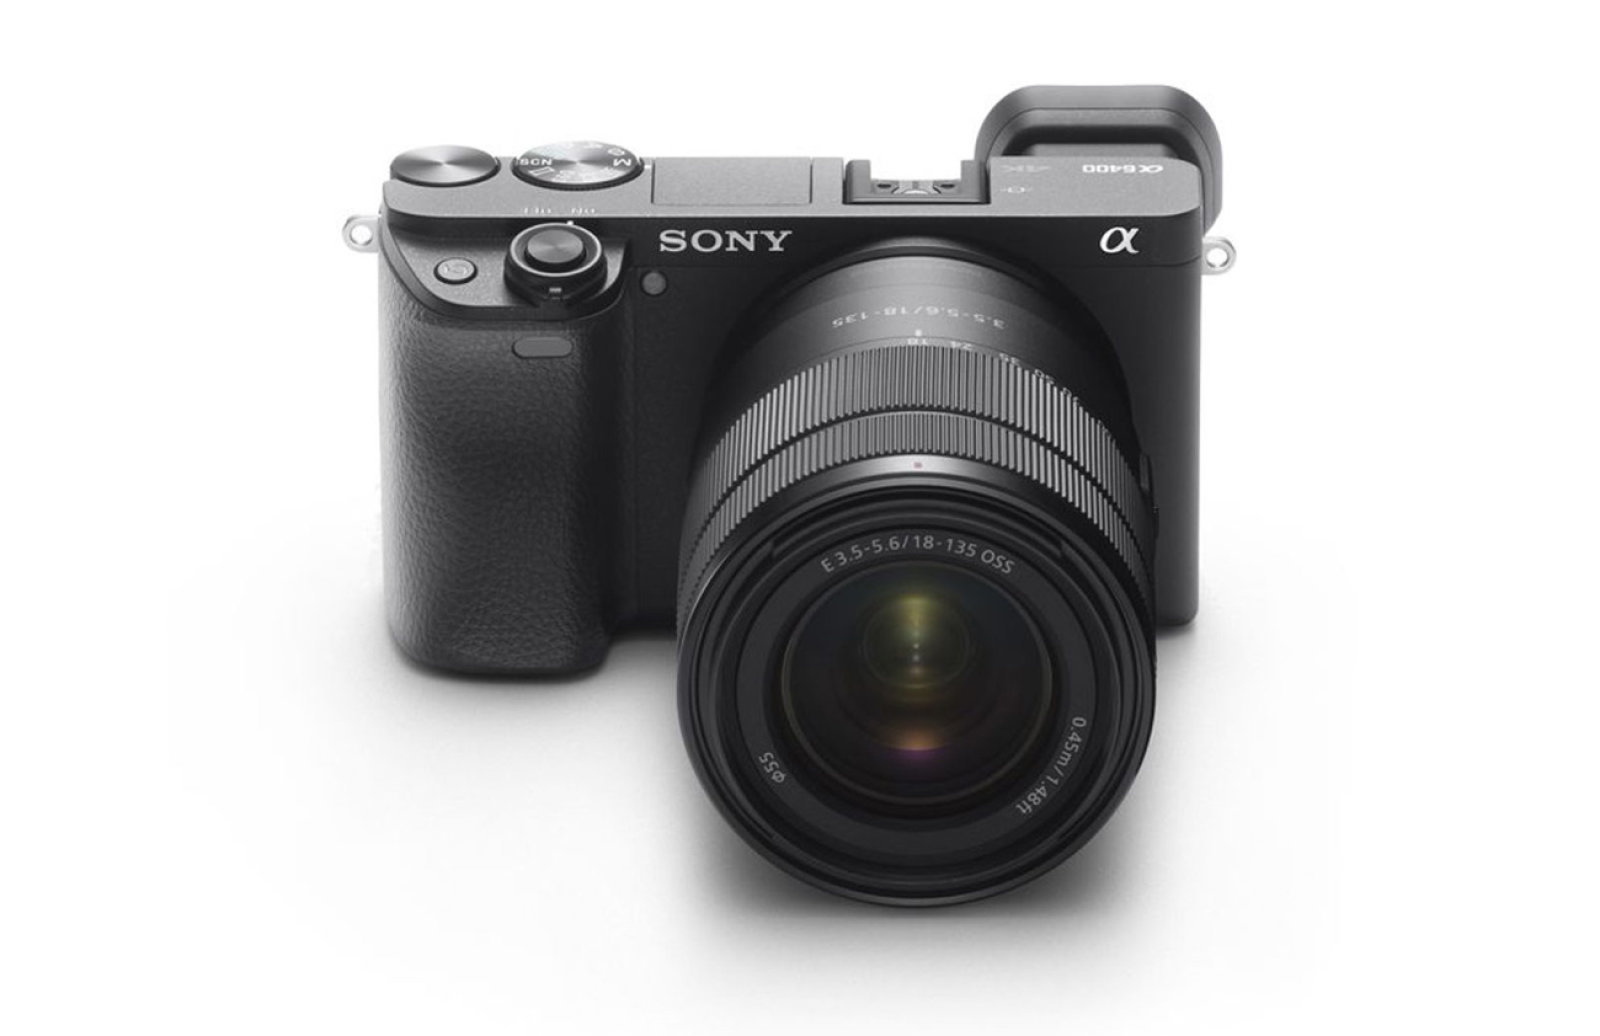 One Day Only: Demo the Sony Alpha a6400 at our Los Angeles Store